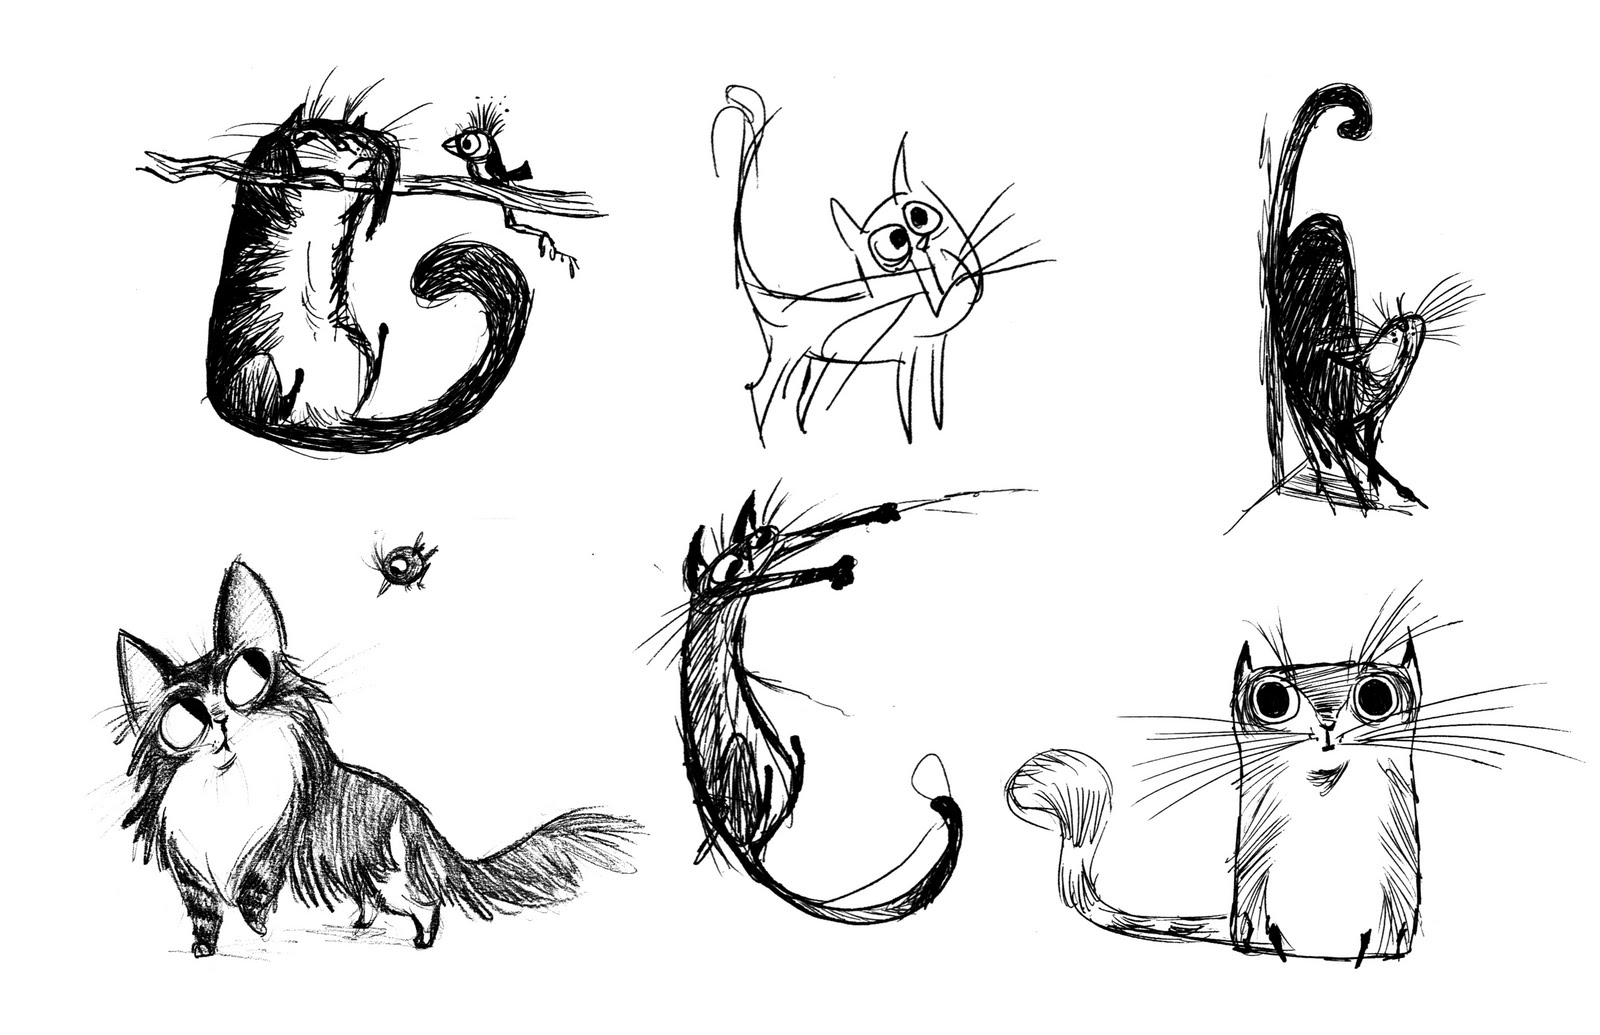 Free Cat Drawings, Download Free Cat Drawings png images, Free ClipArts ...
 Cats Drawing Tumblr